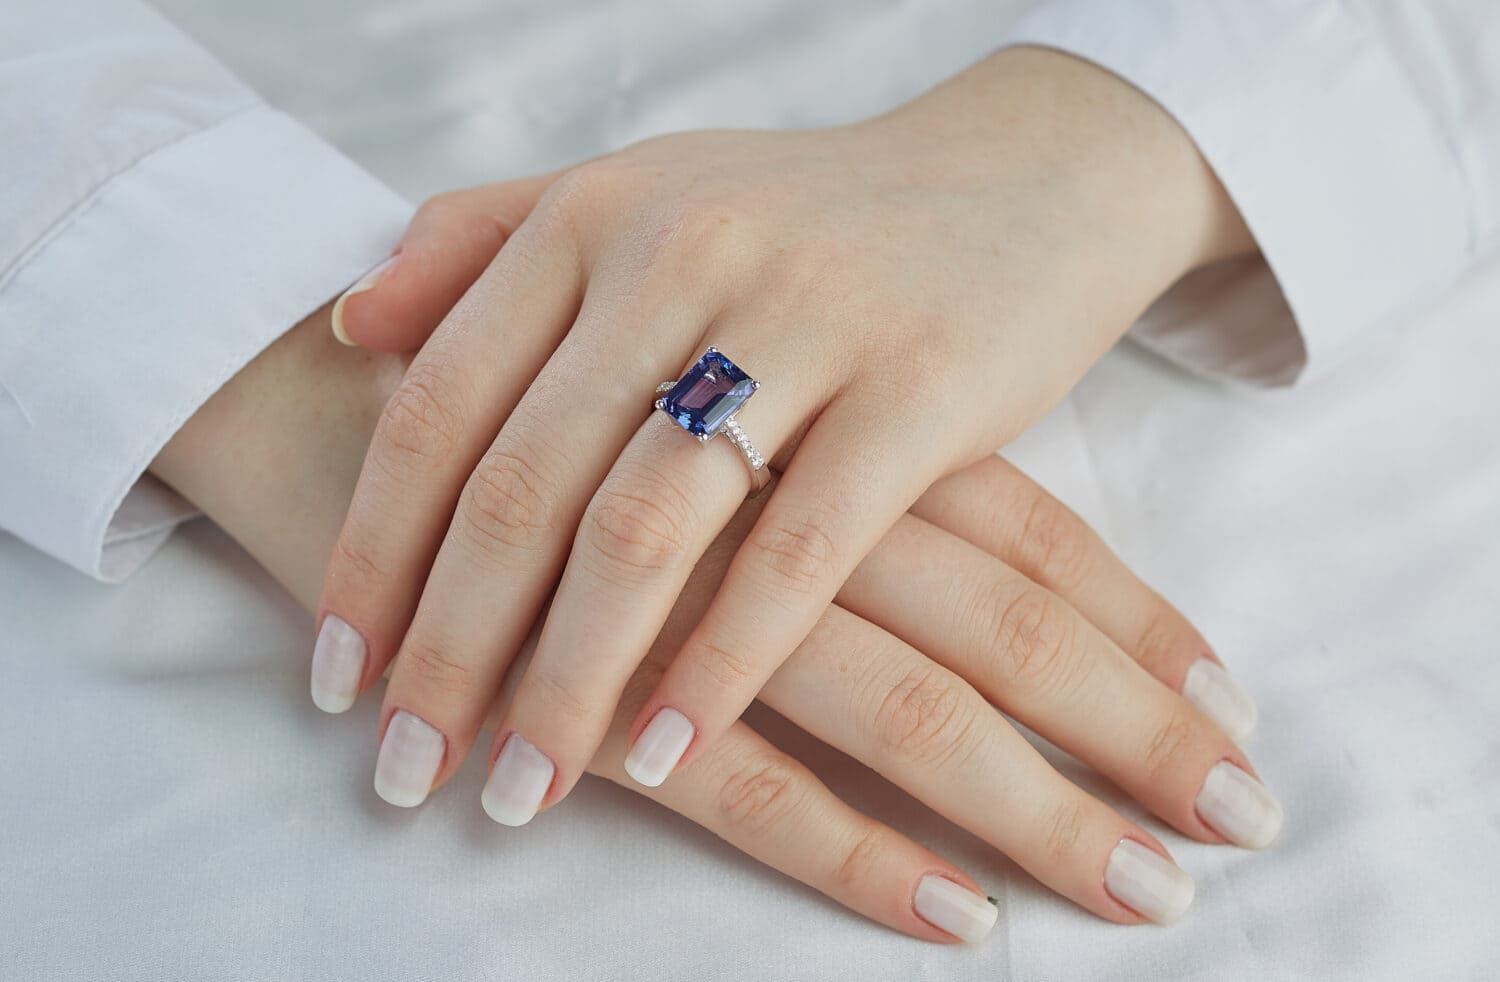 The blue stone diamond ring is on a lady finger. A very expensive custom ring.